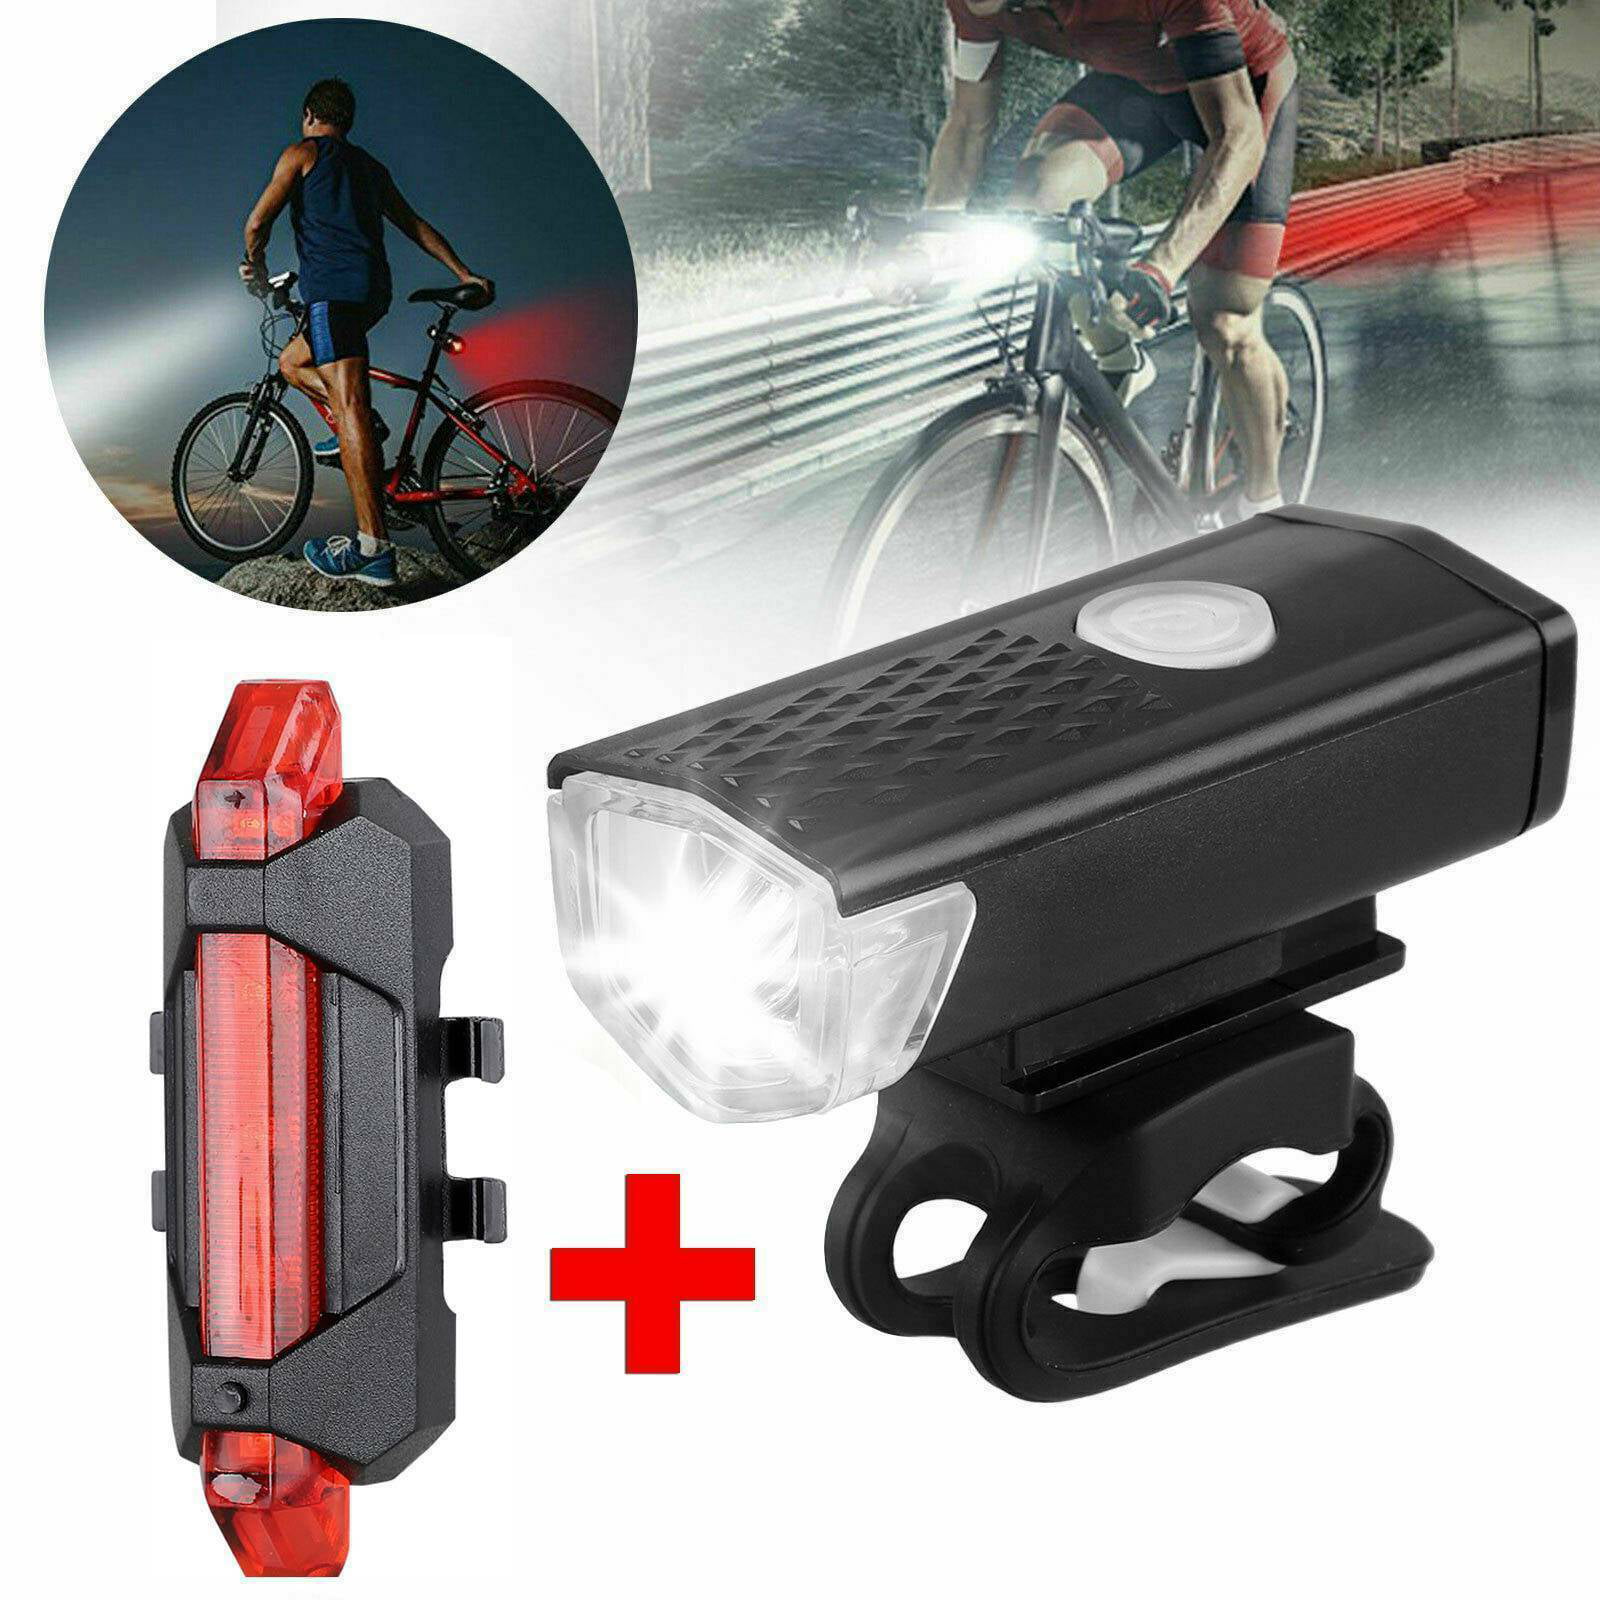 Details about   Lightweight Waterproof Bike Front Light USB Rechargeable Cycling Equipment New 